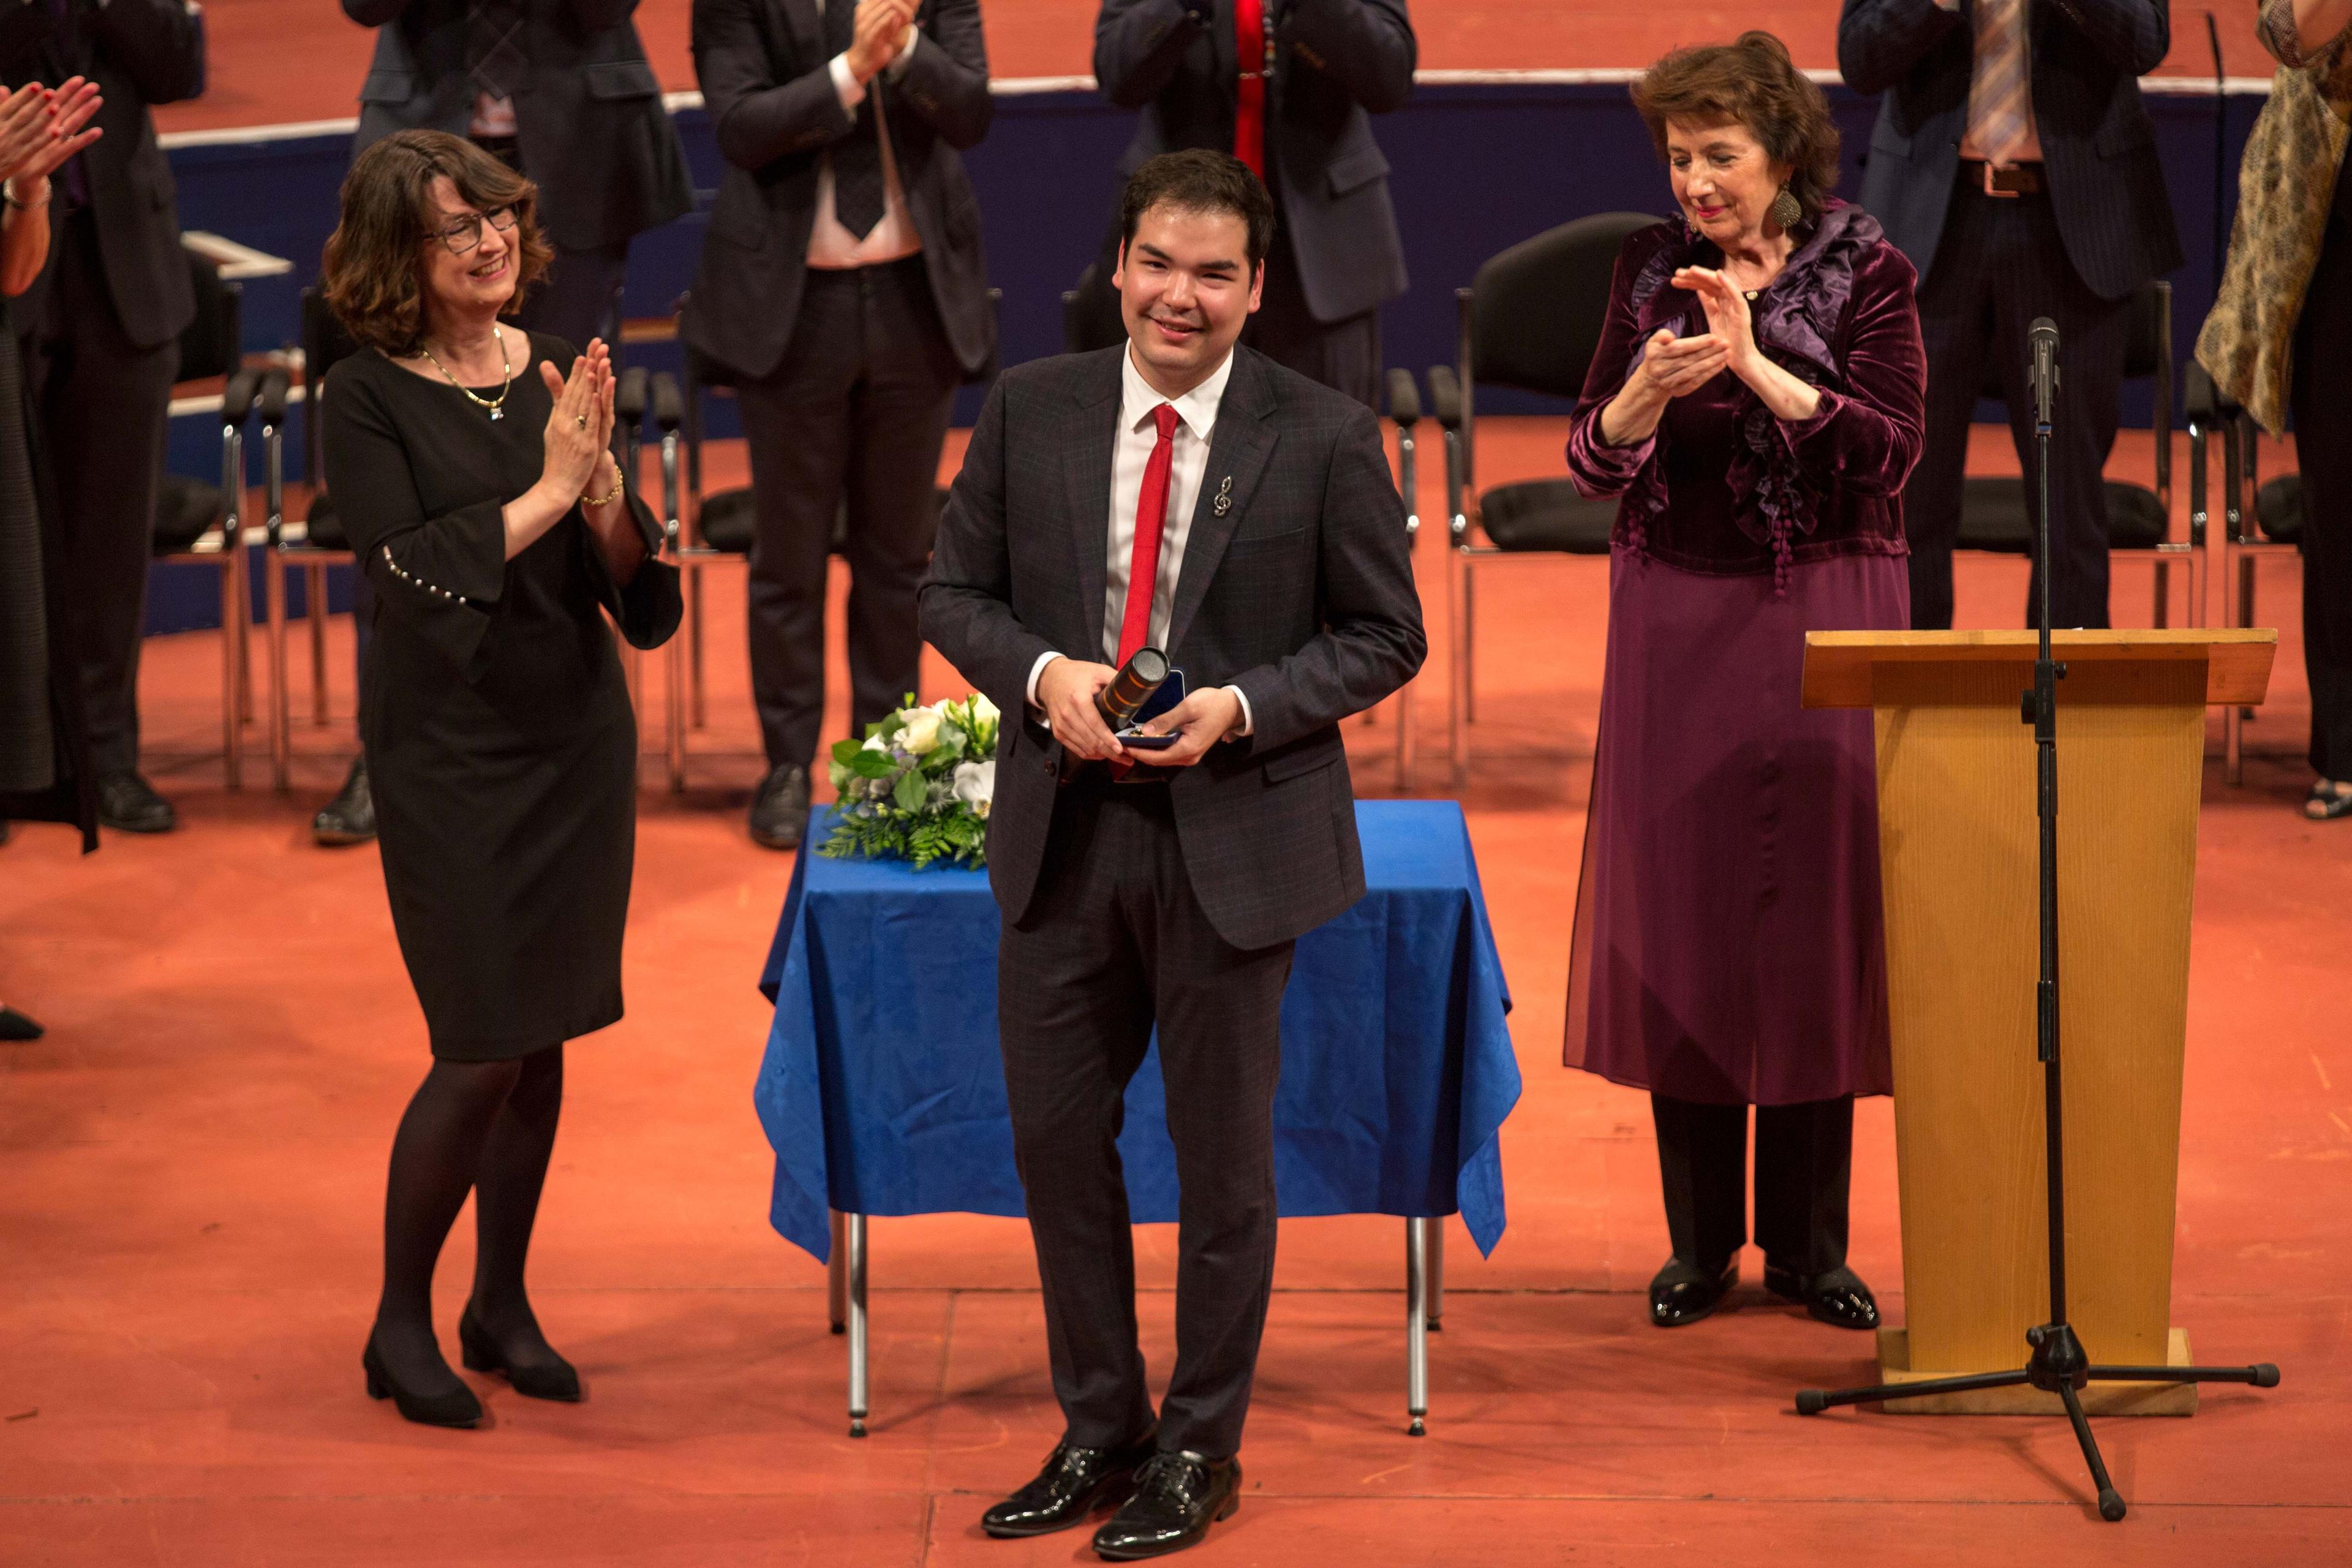 Alim Beisembayev stood wearing a suit on stage receiving his gold medal from the 2021 event, receiving applause from 2 ladies stood either side of him